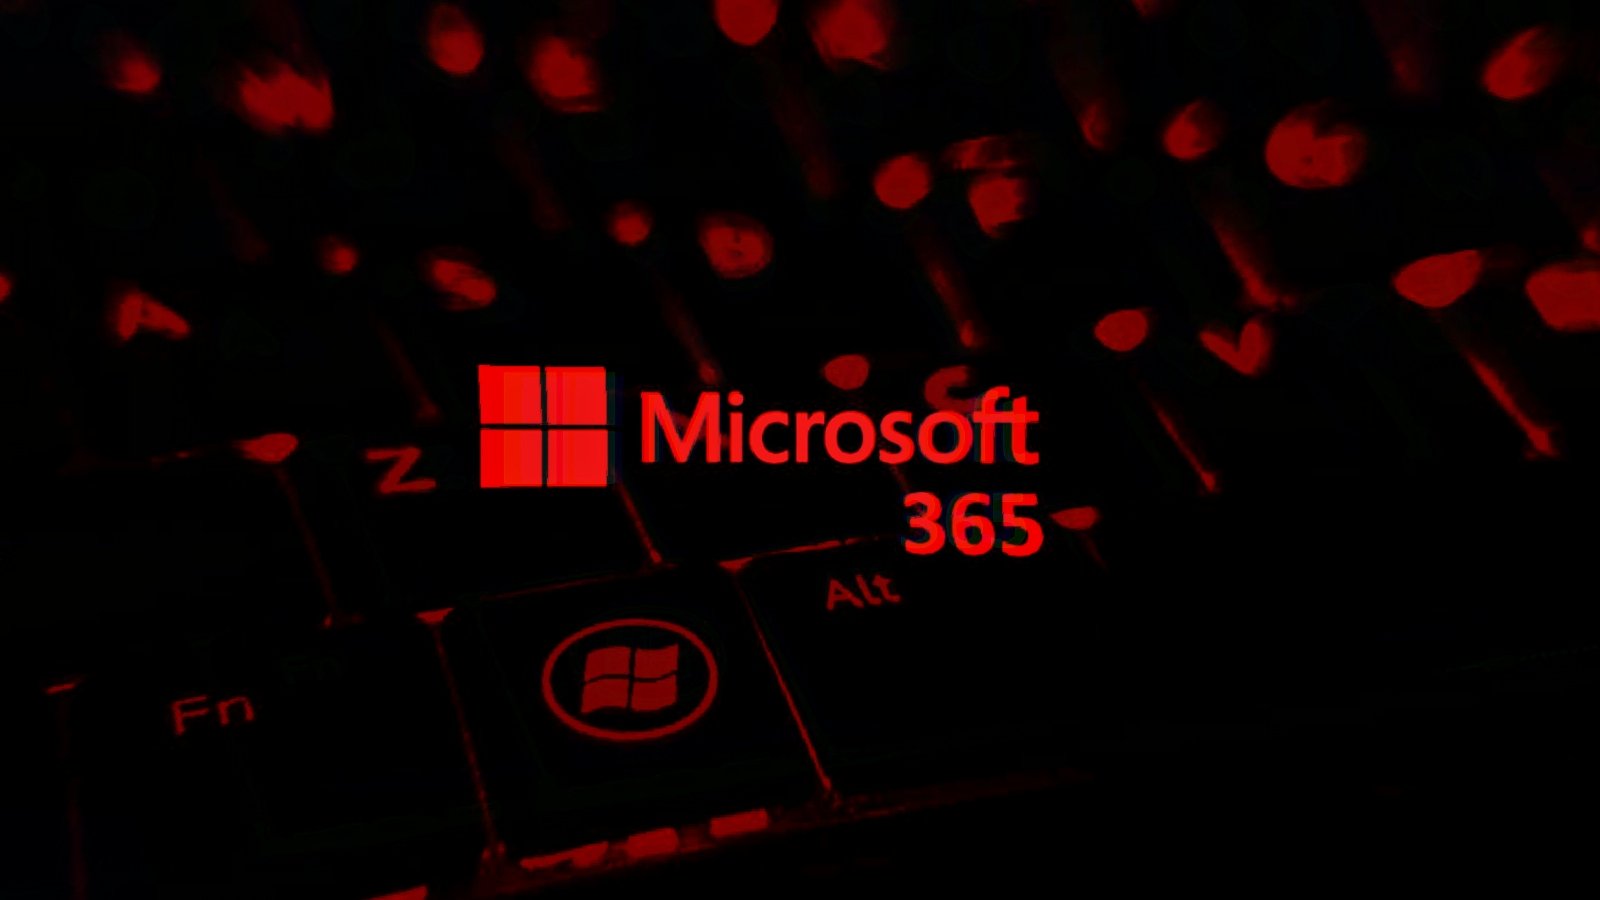 EvilProxy phishing campaign targets 120,000 Microsoft 365 users – Source: www.bleepingcomputer.com